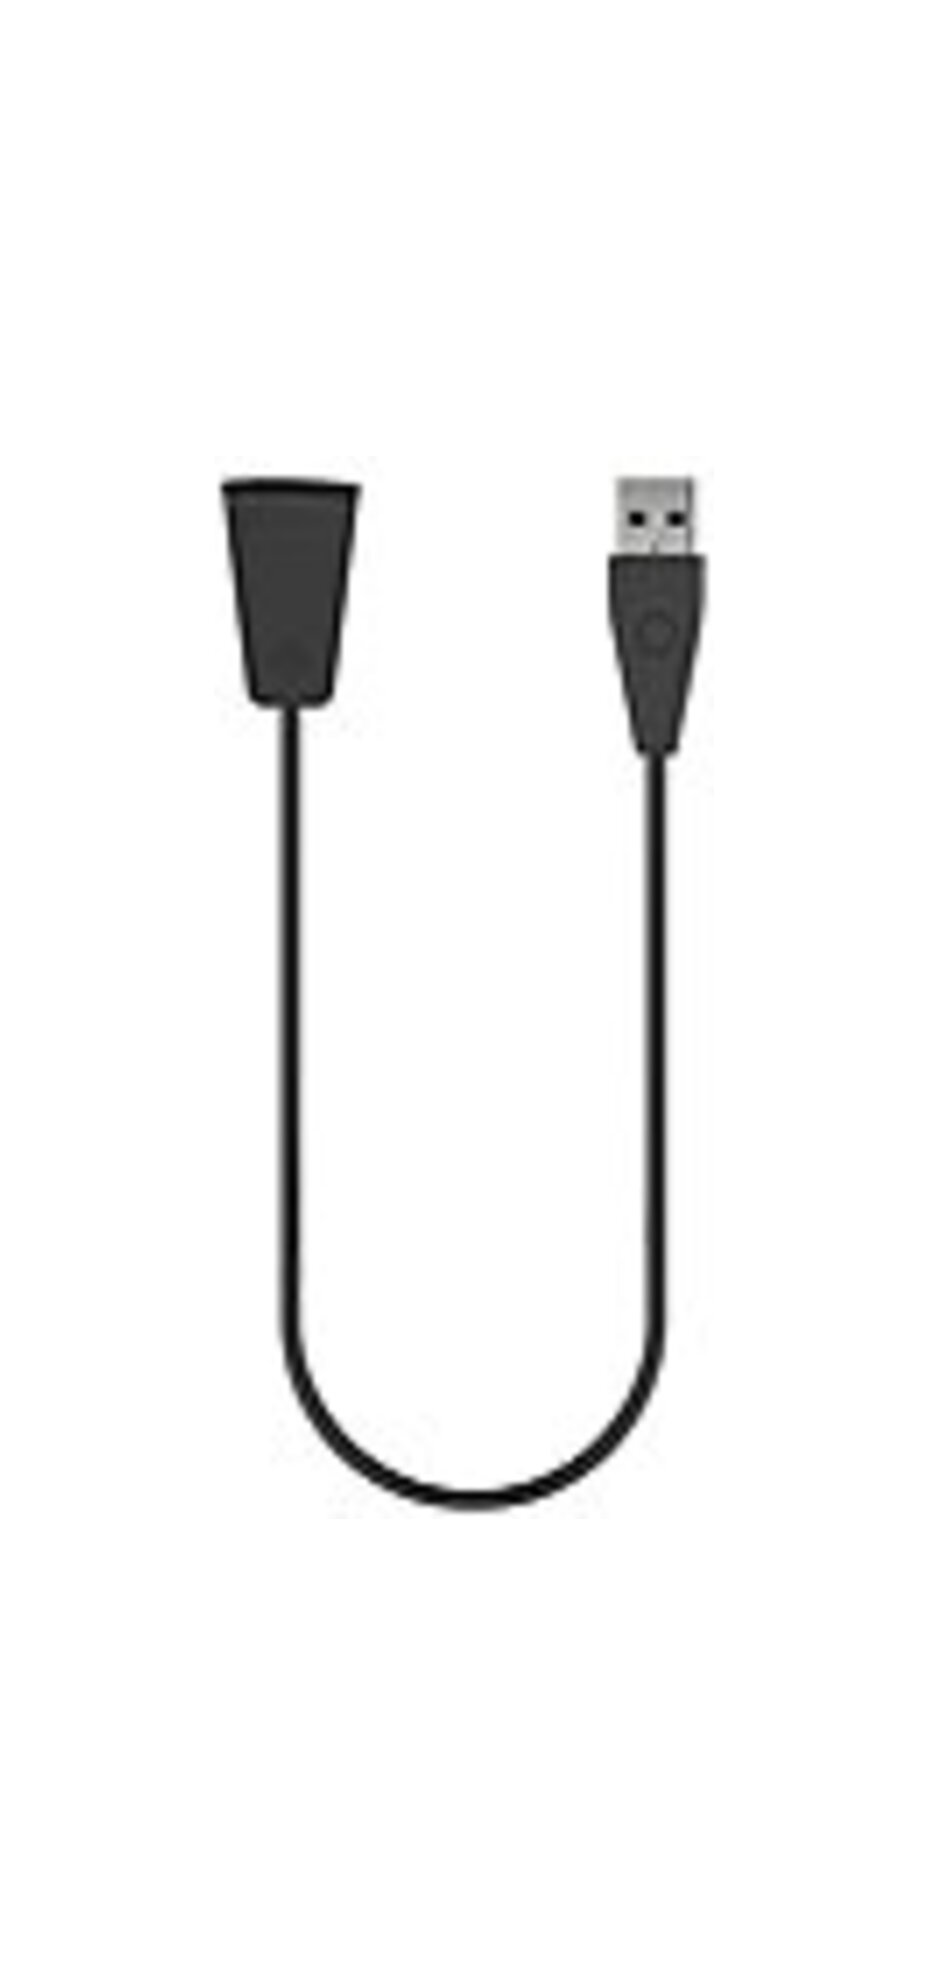 Fitbit Charging Cable - For Wearable Activity Tracker